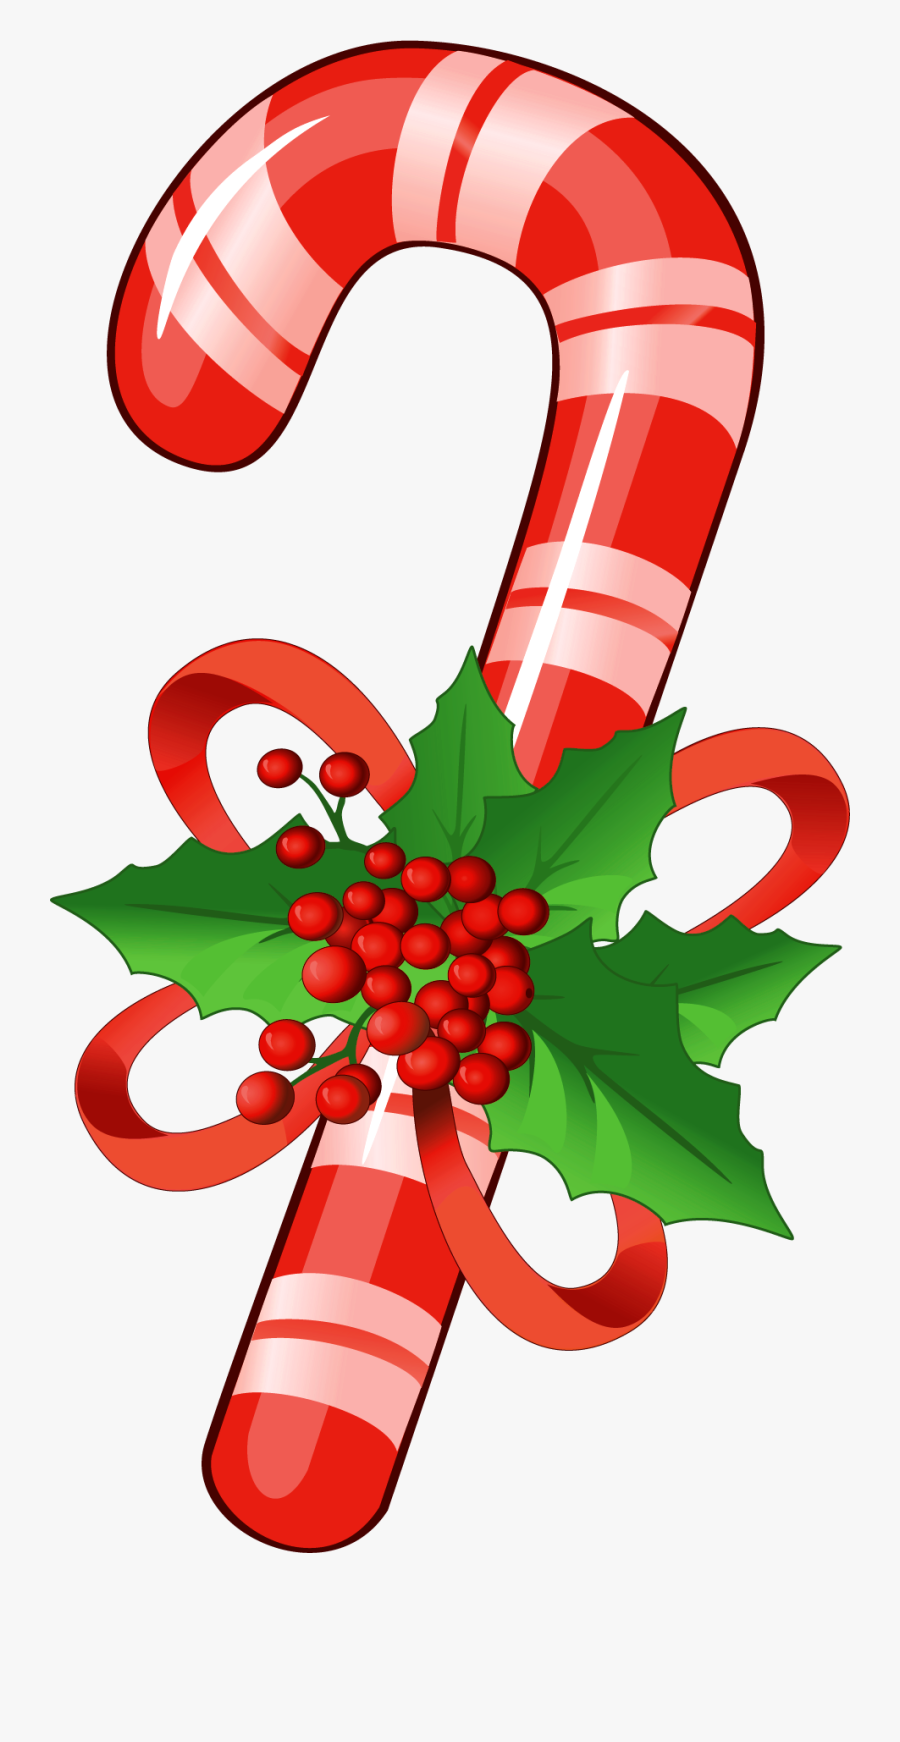 Candy Cane Clipart - Candy Cane Clipart Png, Transparent Clipart